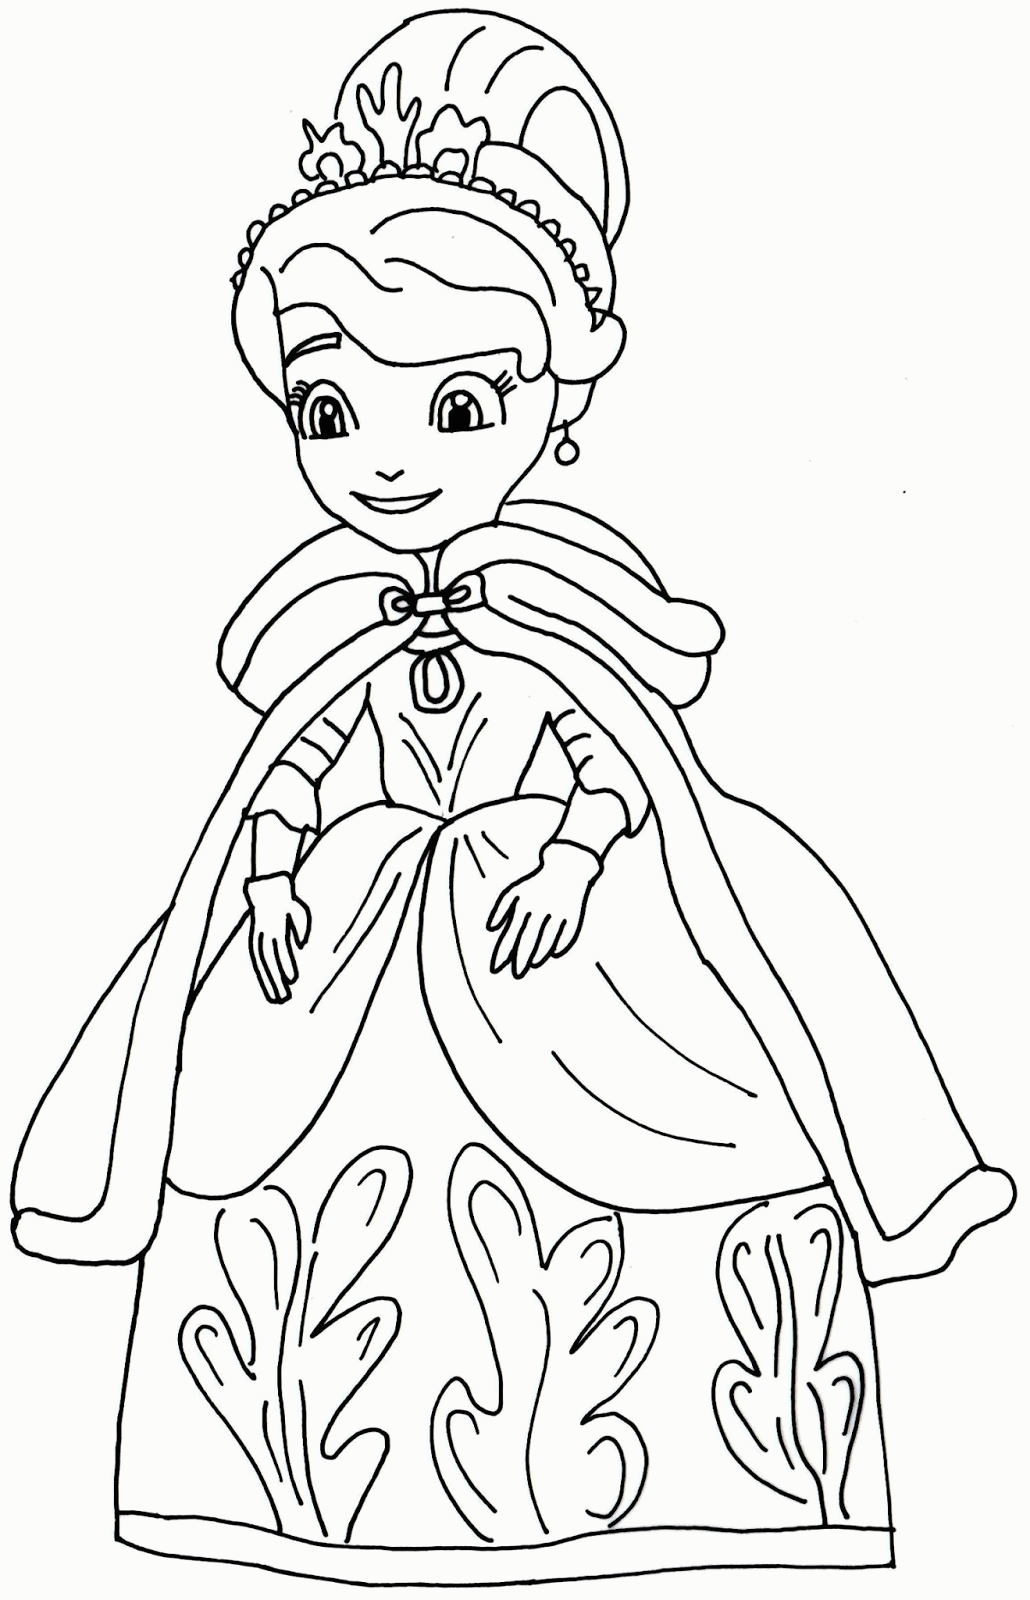 Sofia the First Coloring Pages Cartoons Princess Sofia the First Printable 2020 5837 Coloring4free